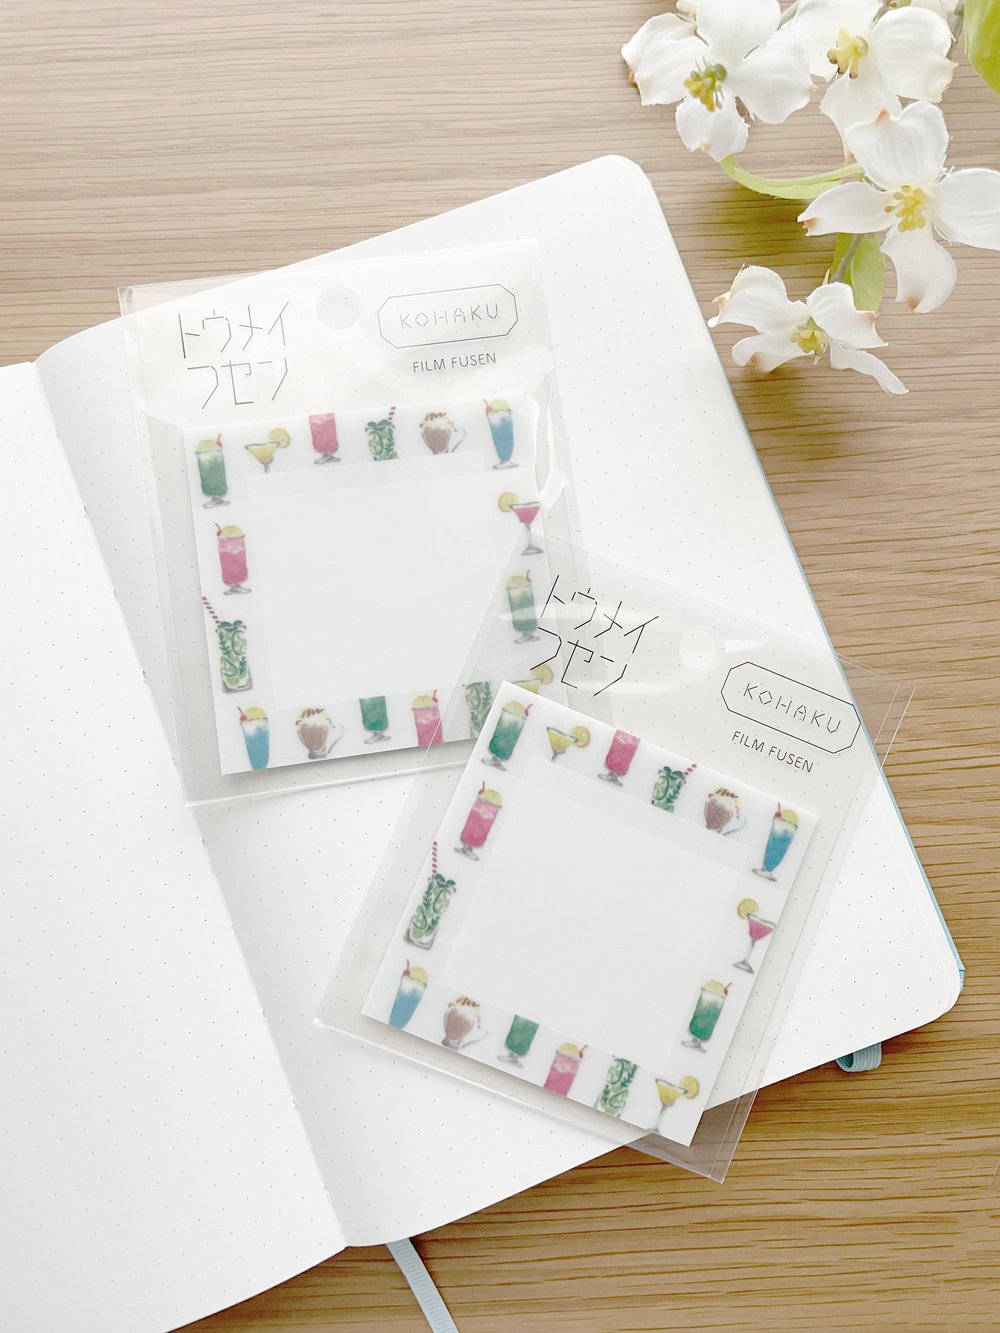 Washi Tapes White Transparent, Sticky Notes And Washi Tape For Journaling  Planner, Sticky Note, Washi Tape, Planner PNG Image For Free Download